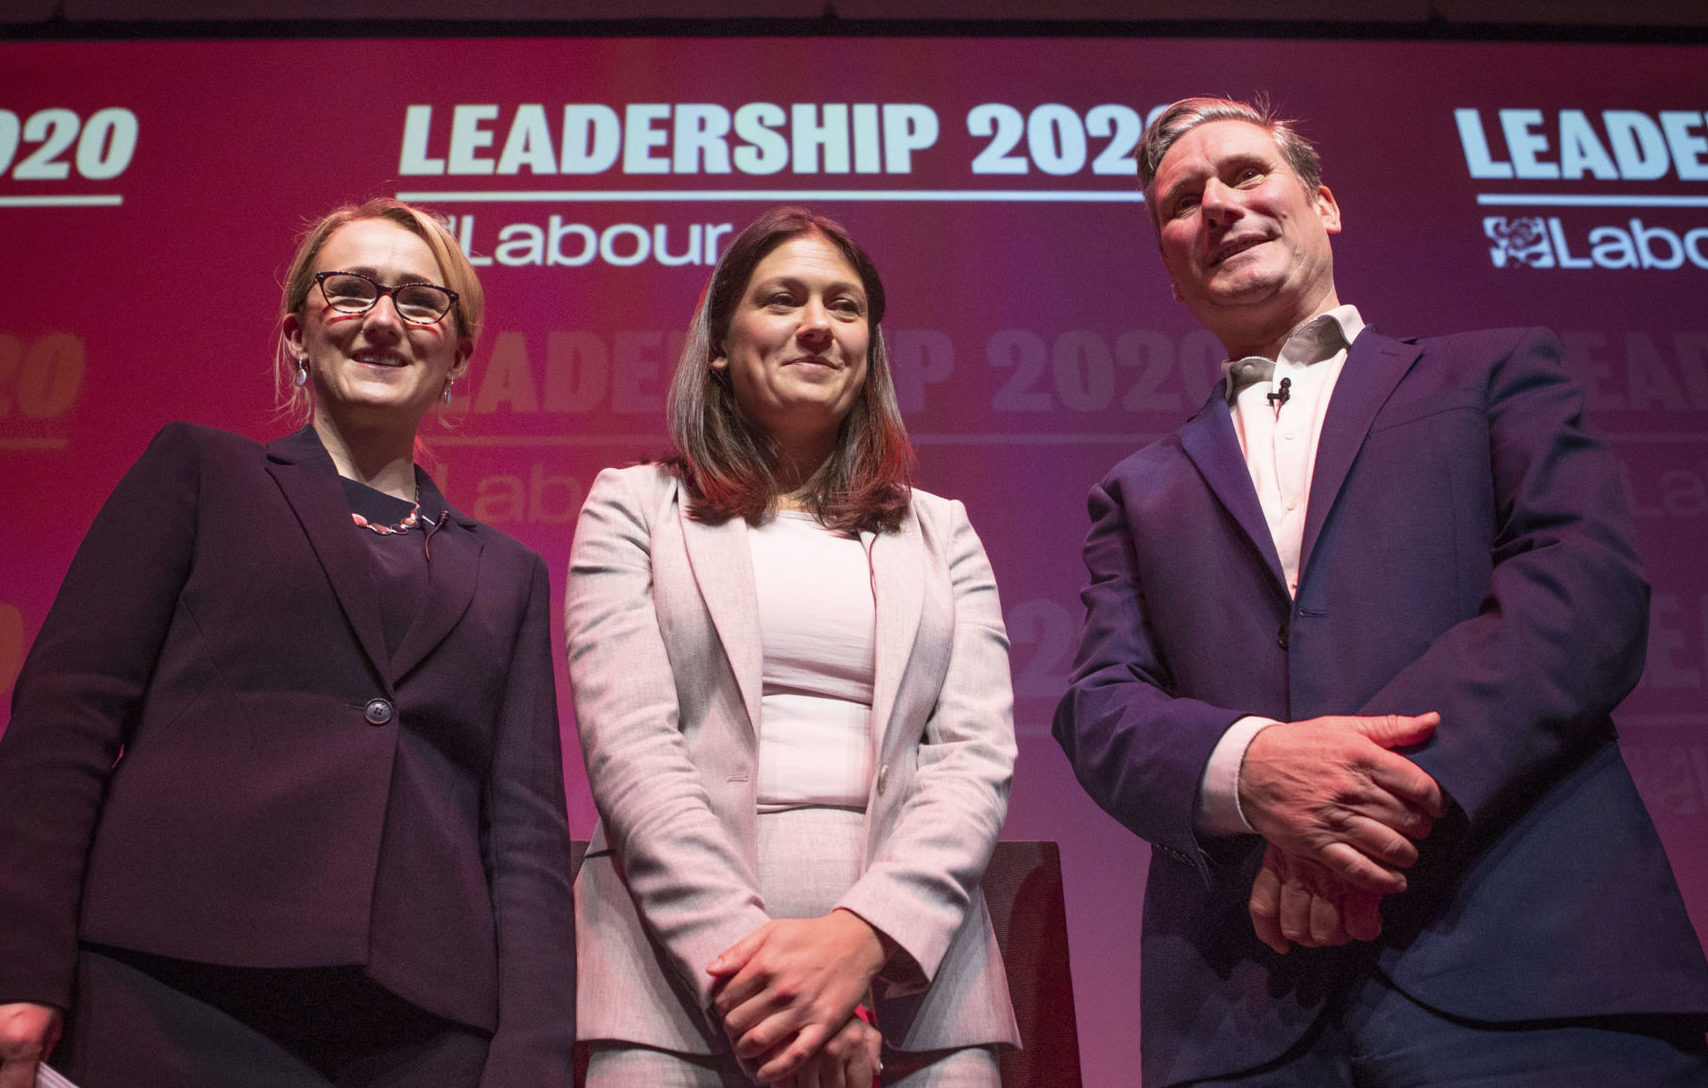 Labour leadership candidates Rebecca Long-Bailey, Lisa Nandy and Sir Keir Starmer after the Labour leadership hustings in Glasgow